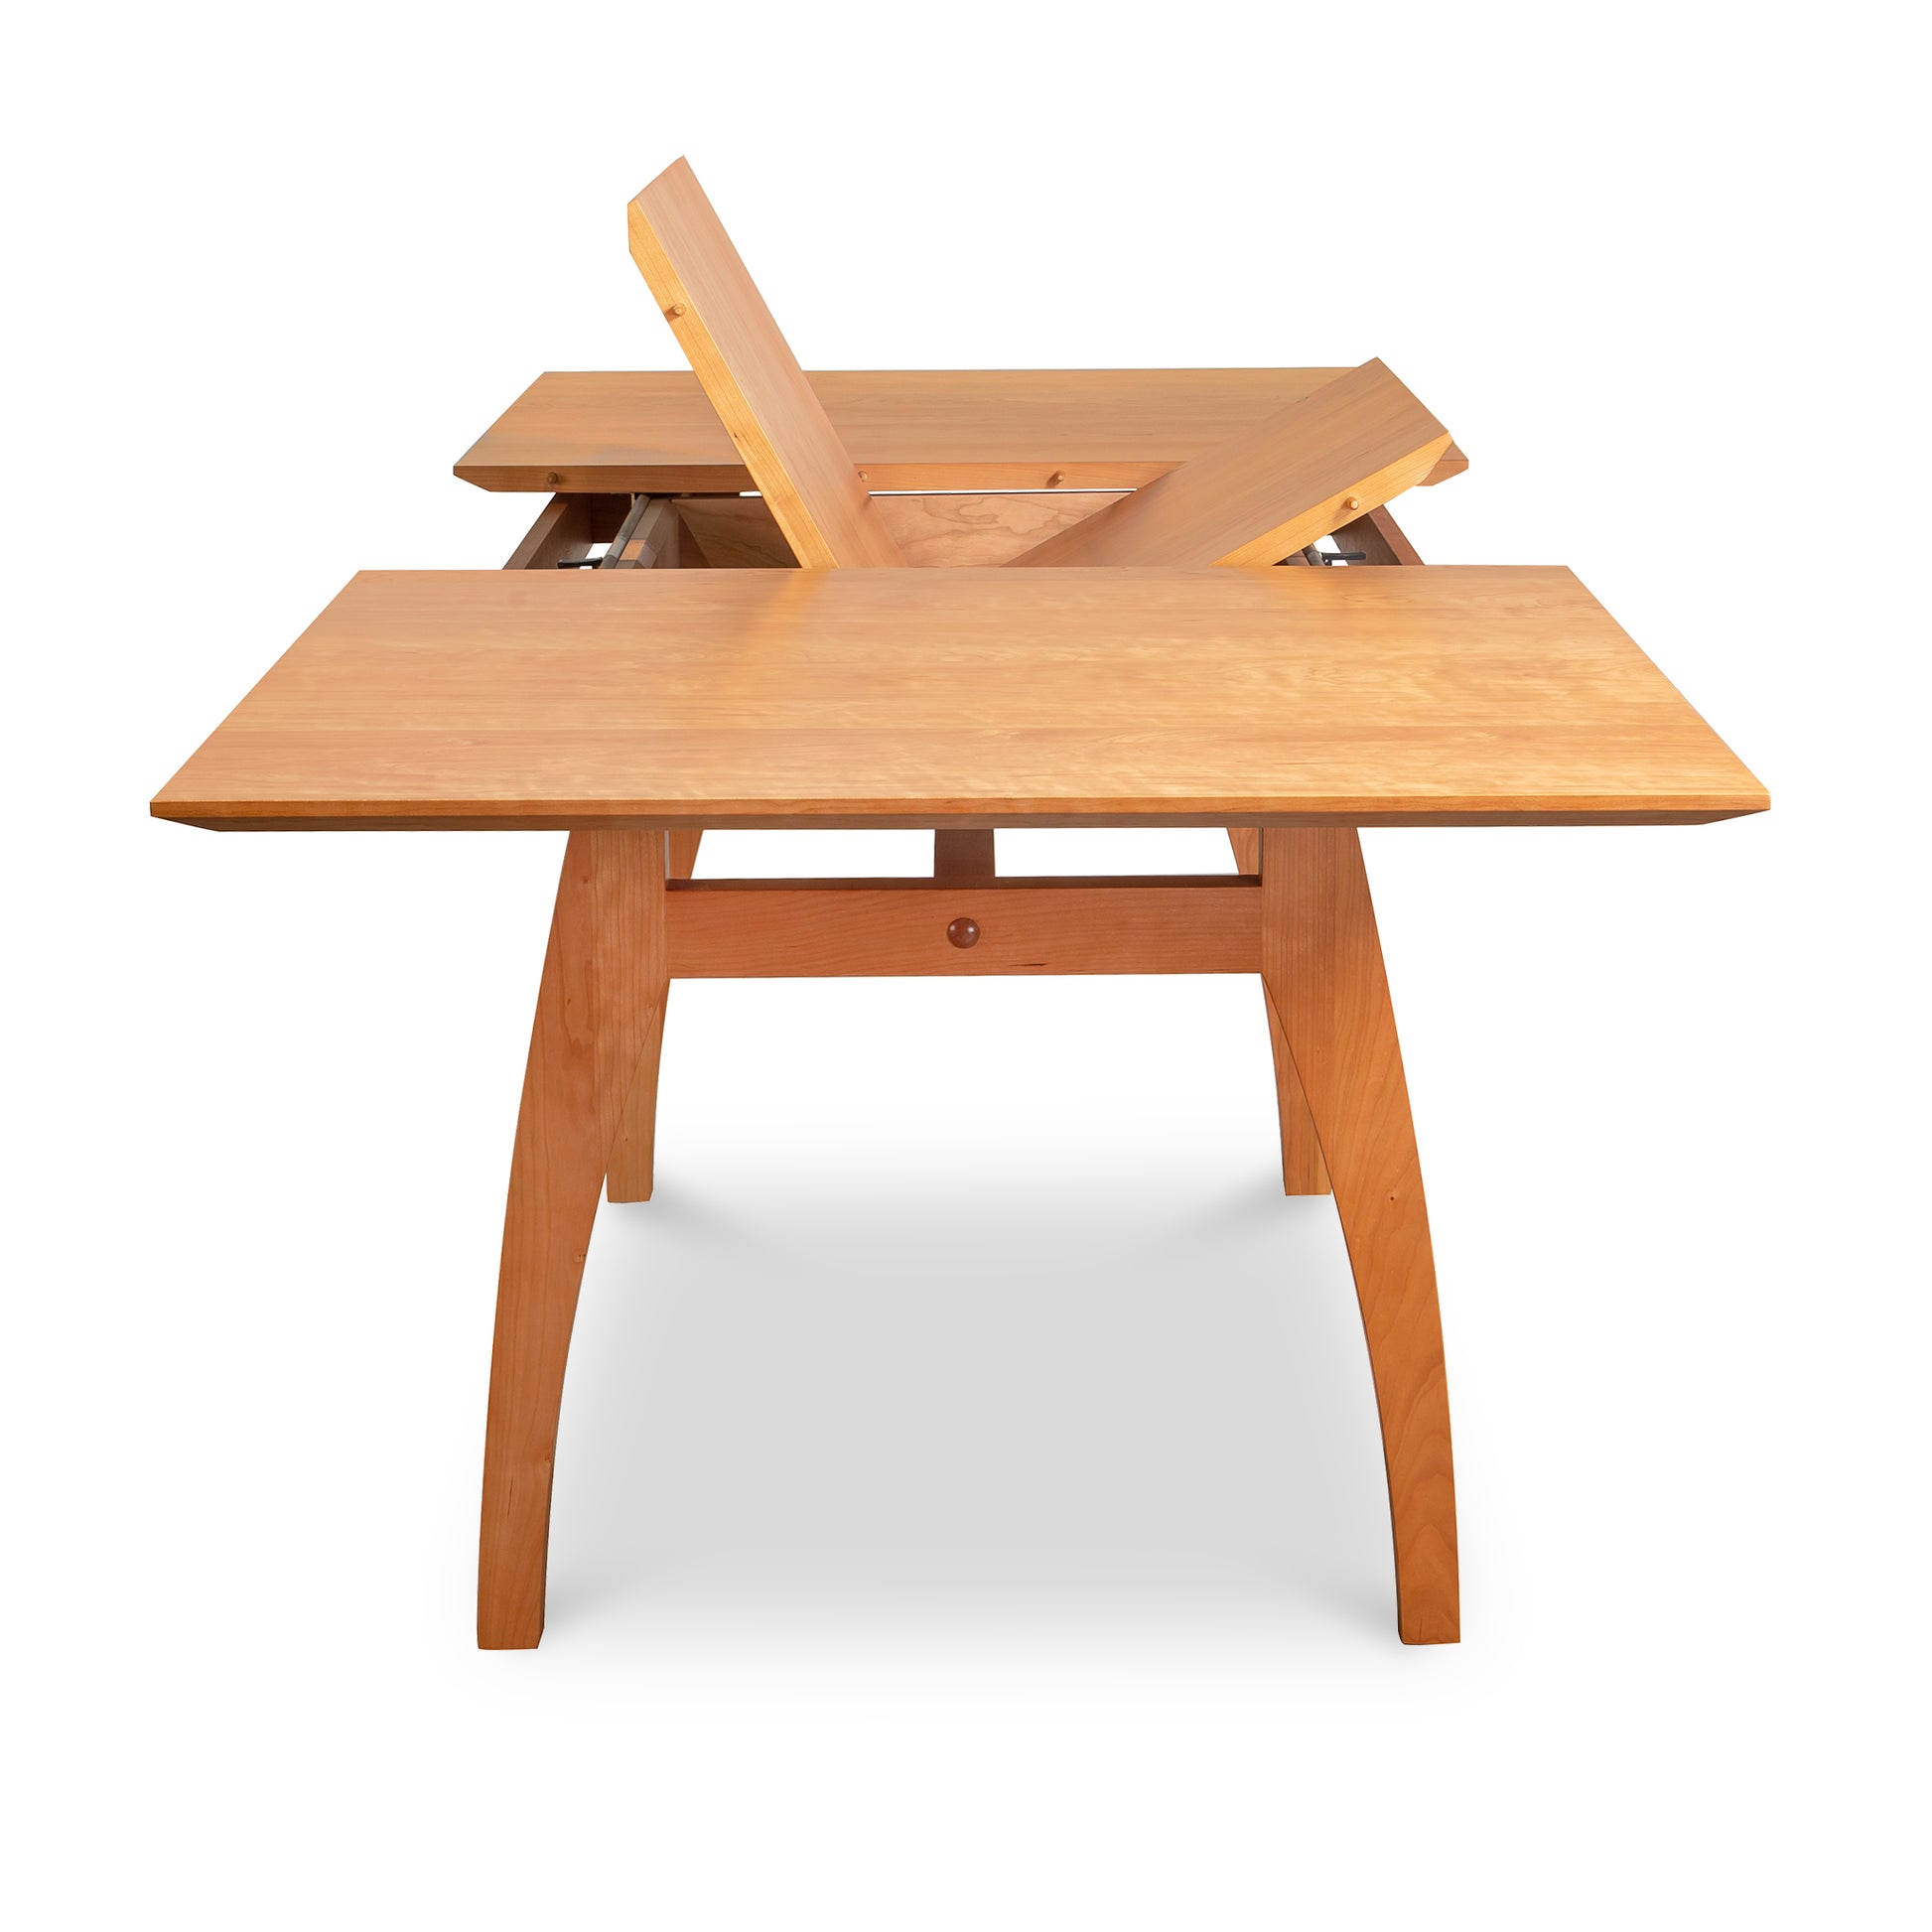 A high-end, Lyndon Furniture Vermont Modern Butterfly Extension Table with a folding top.